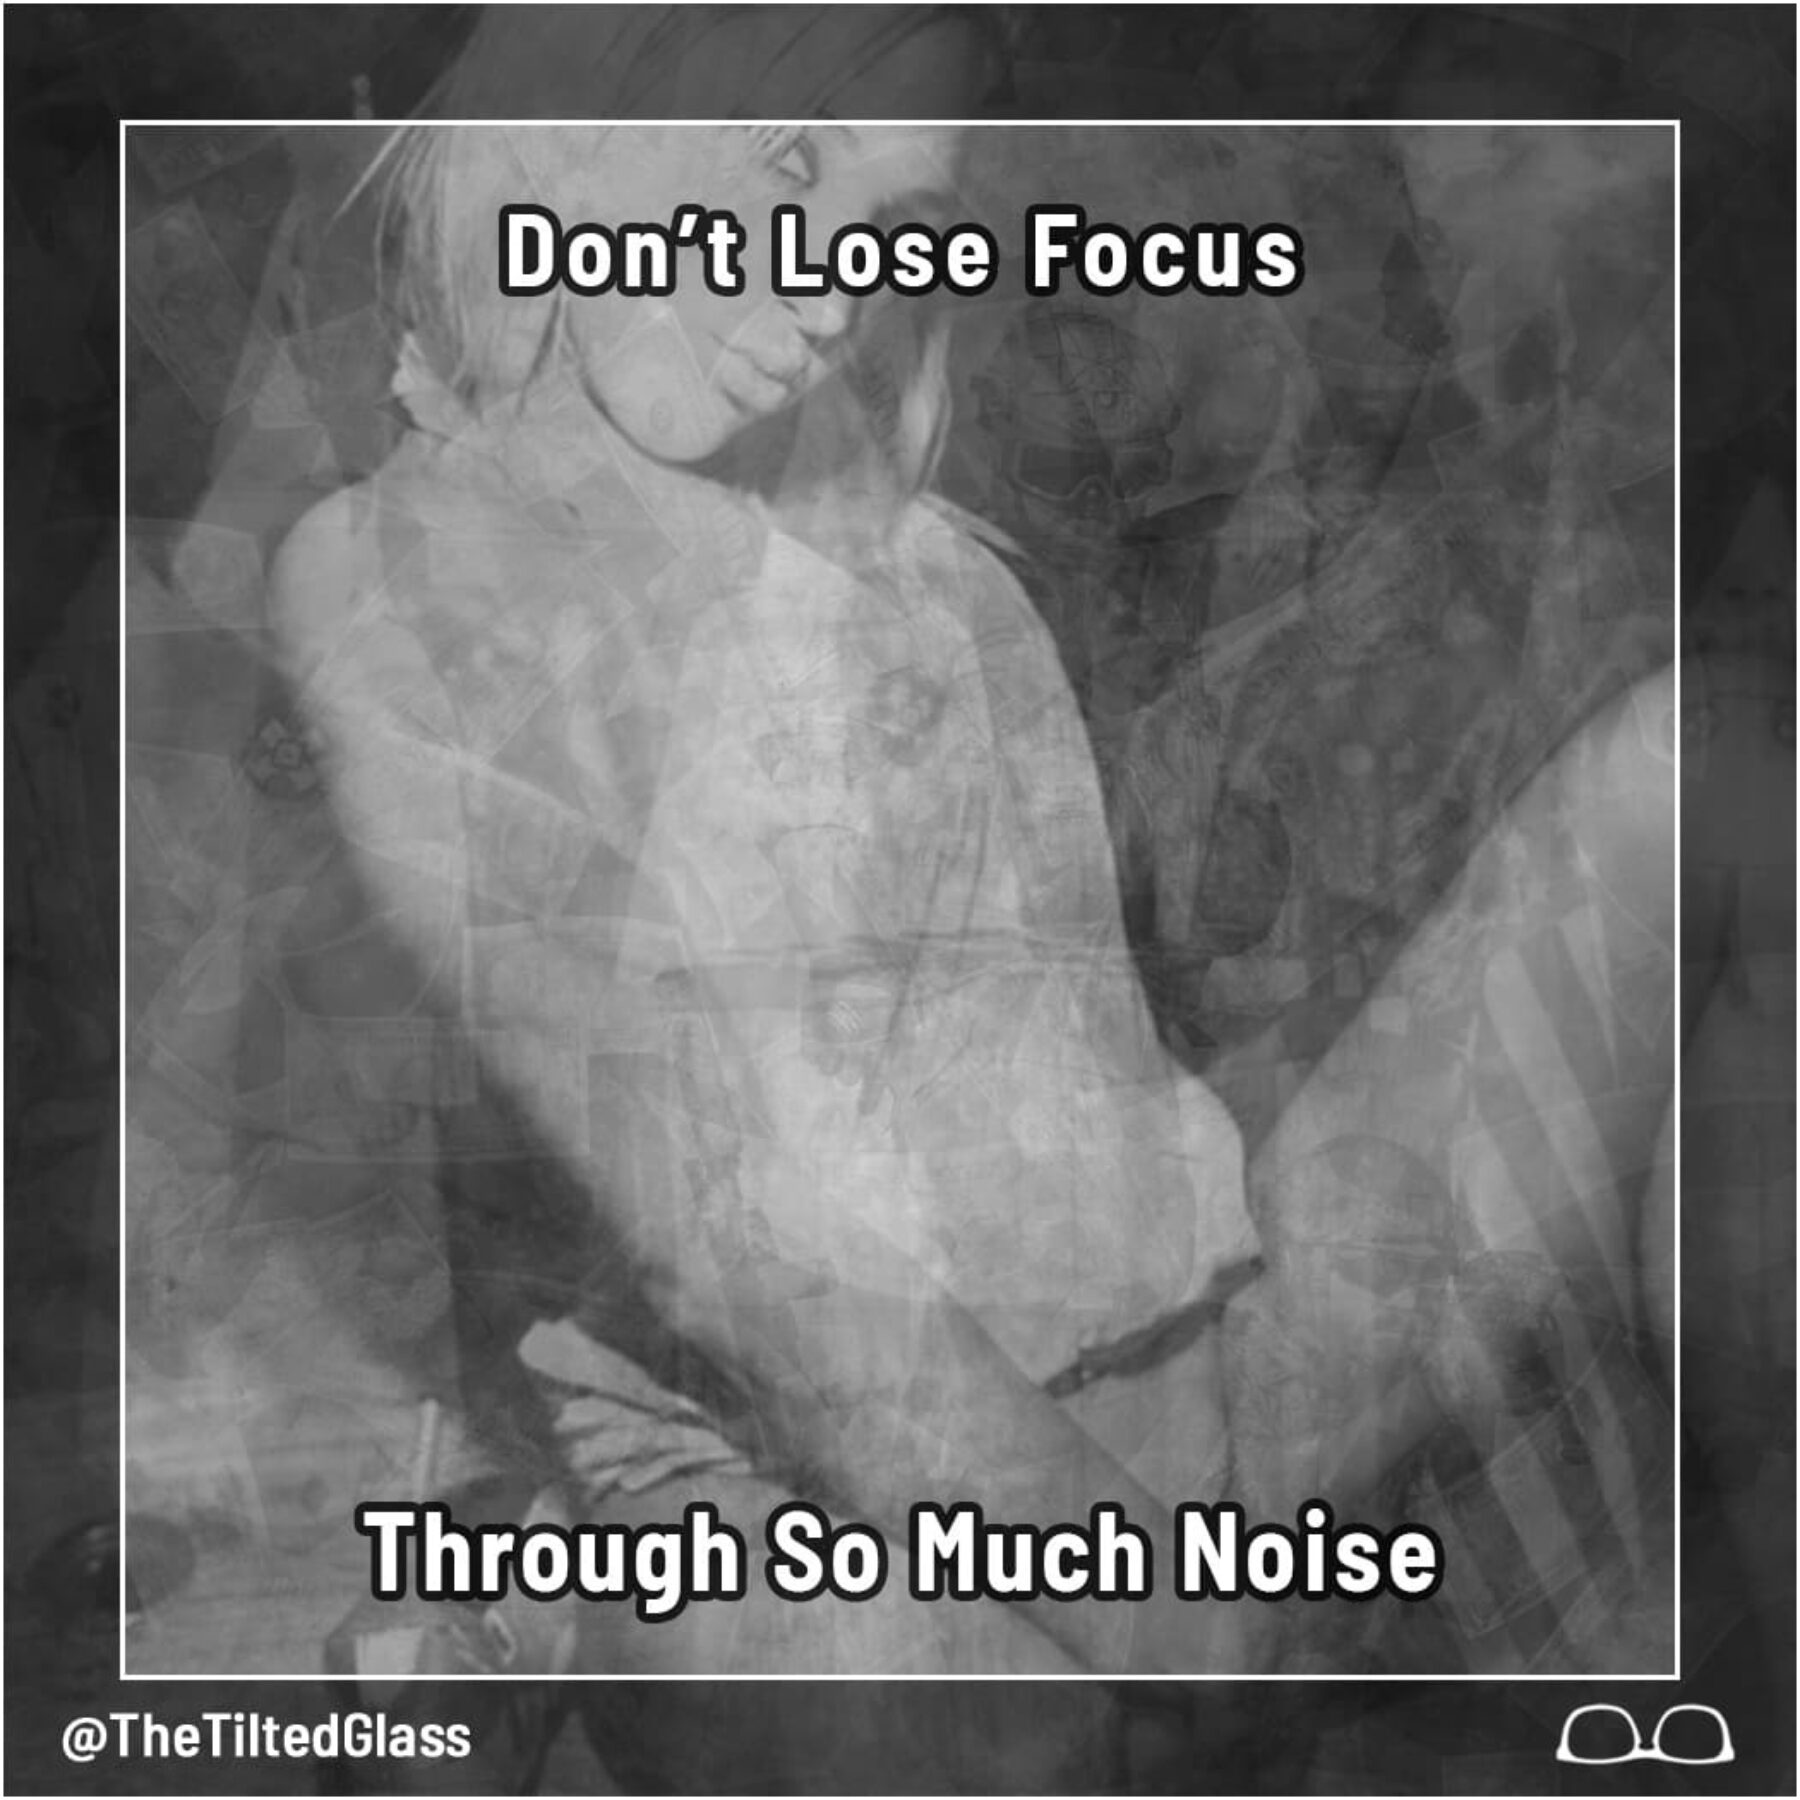 Video: Don't Lose Focus Through So Much Noise